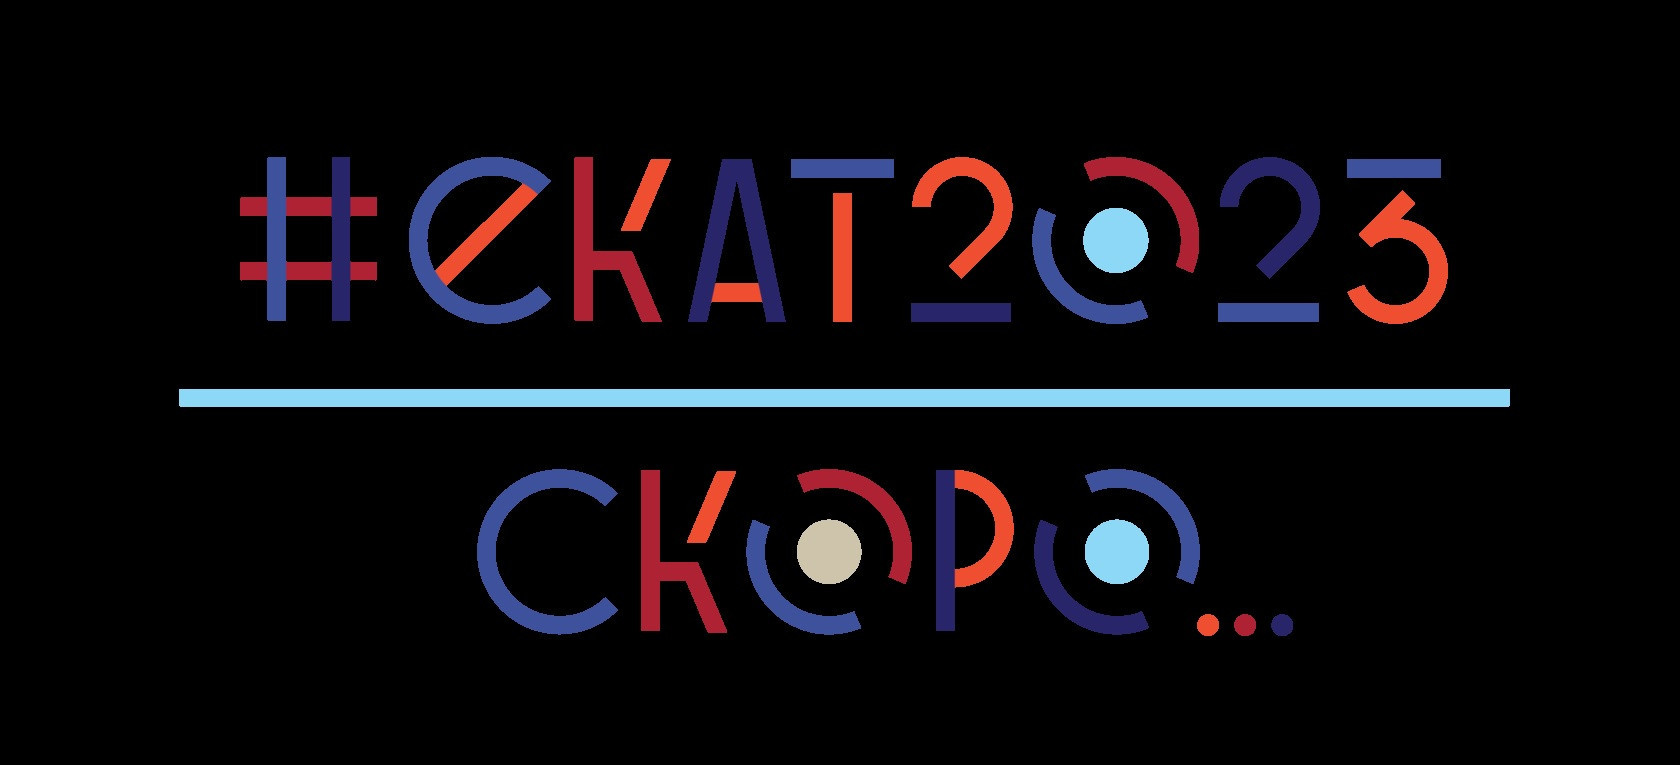 Organisers have released a preview of the Yekaterinburg 2023 logo ©Yekaterinburg 2023